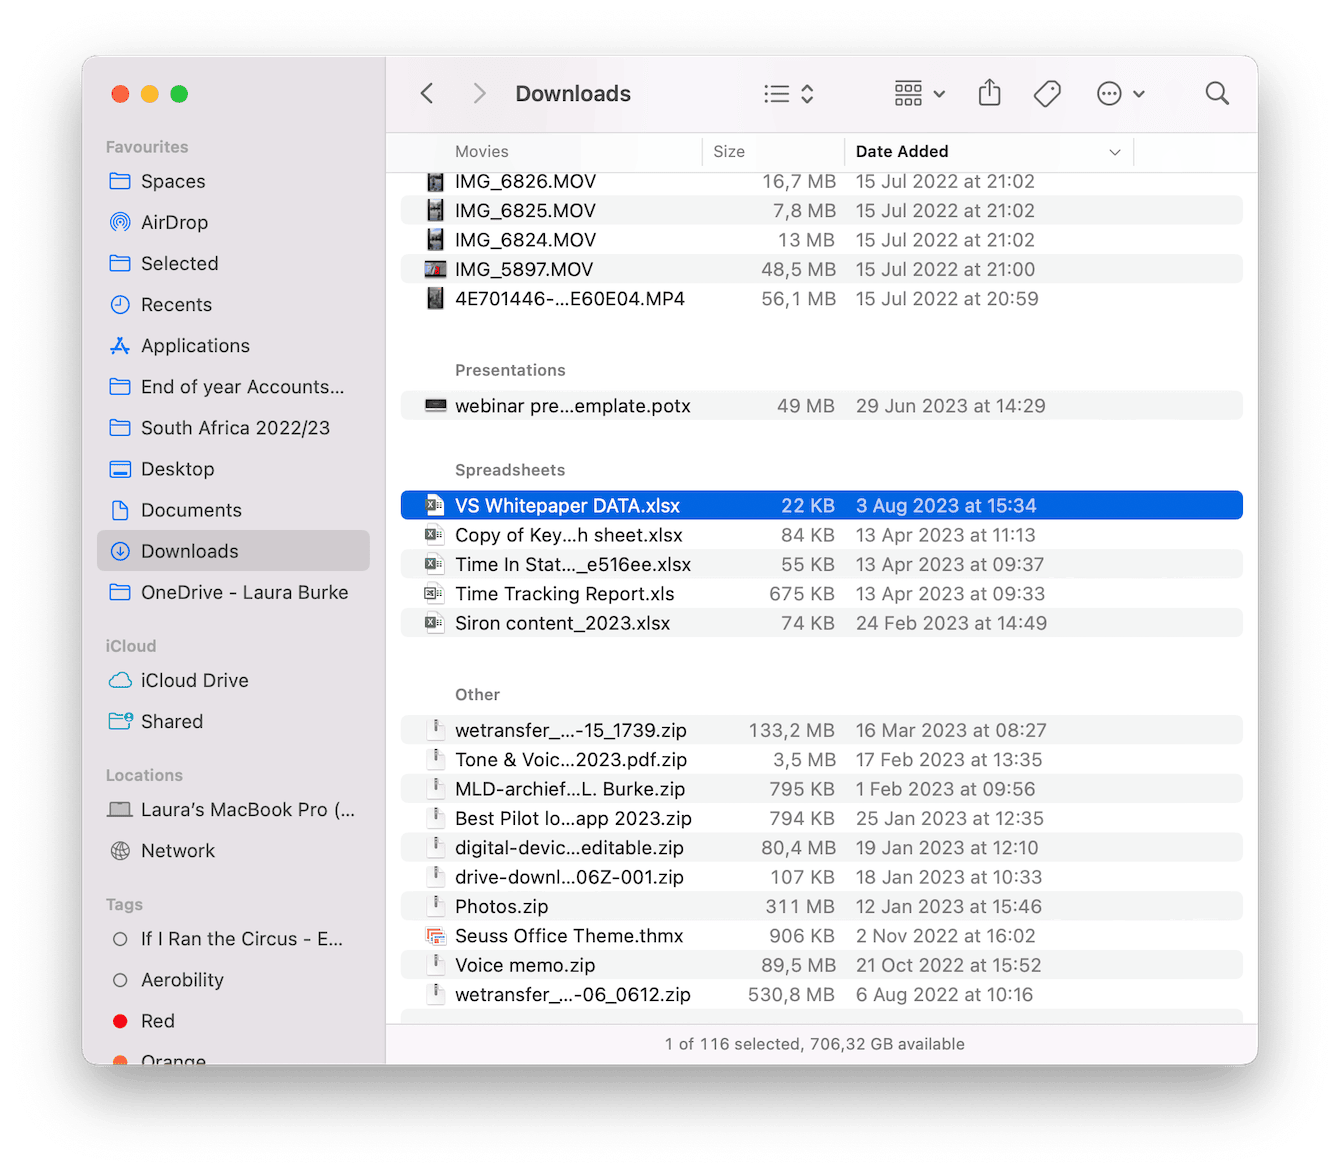 How to delete the contents of Downloads folder